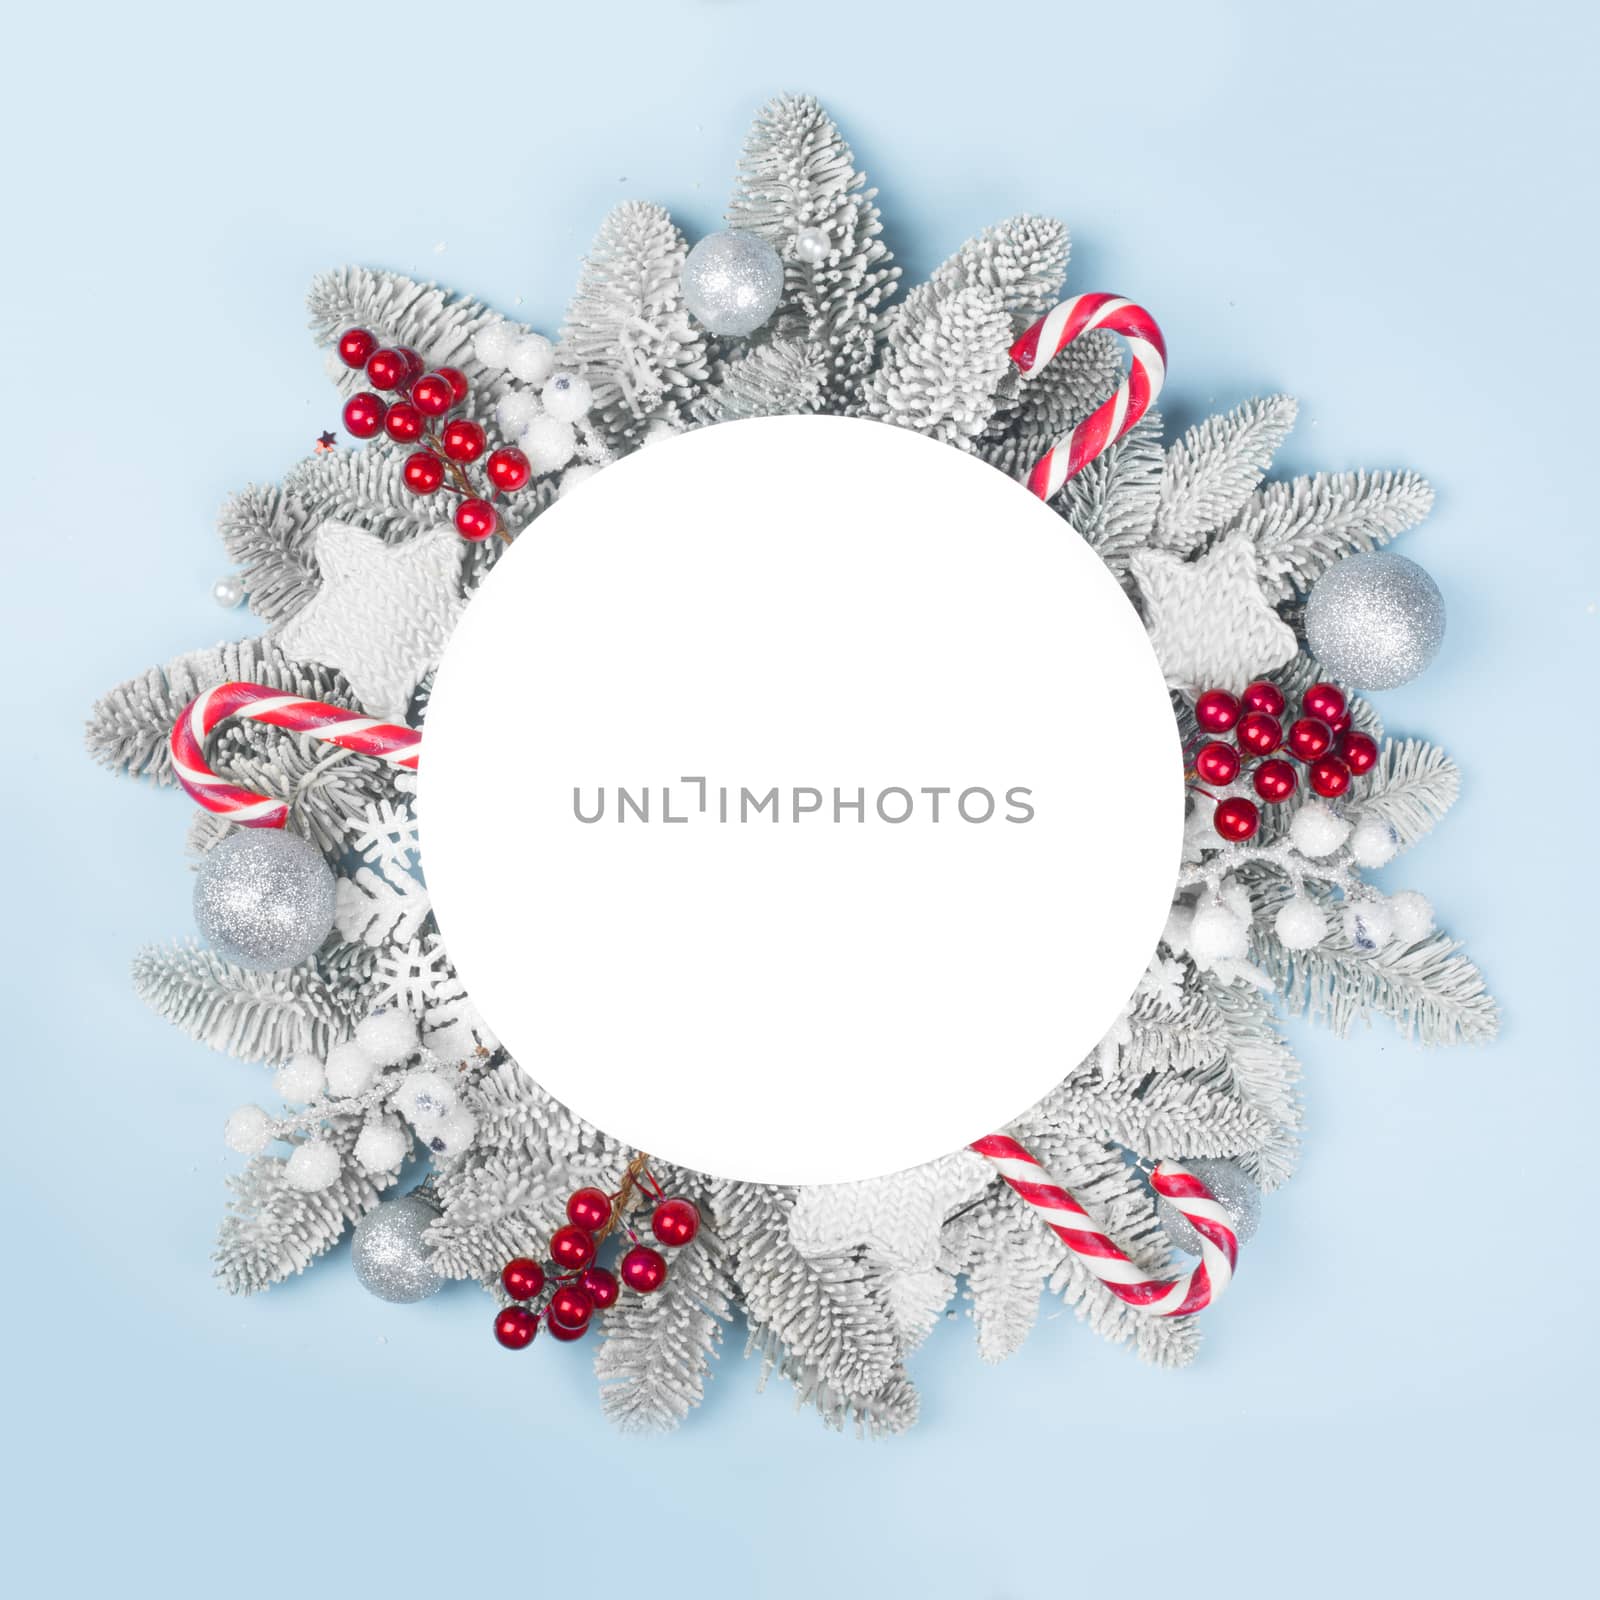 Frosted fir tree twigs and Christmas decorative bauble balls on blue background with white circle card with copy space for text template flat lay top view design